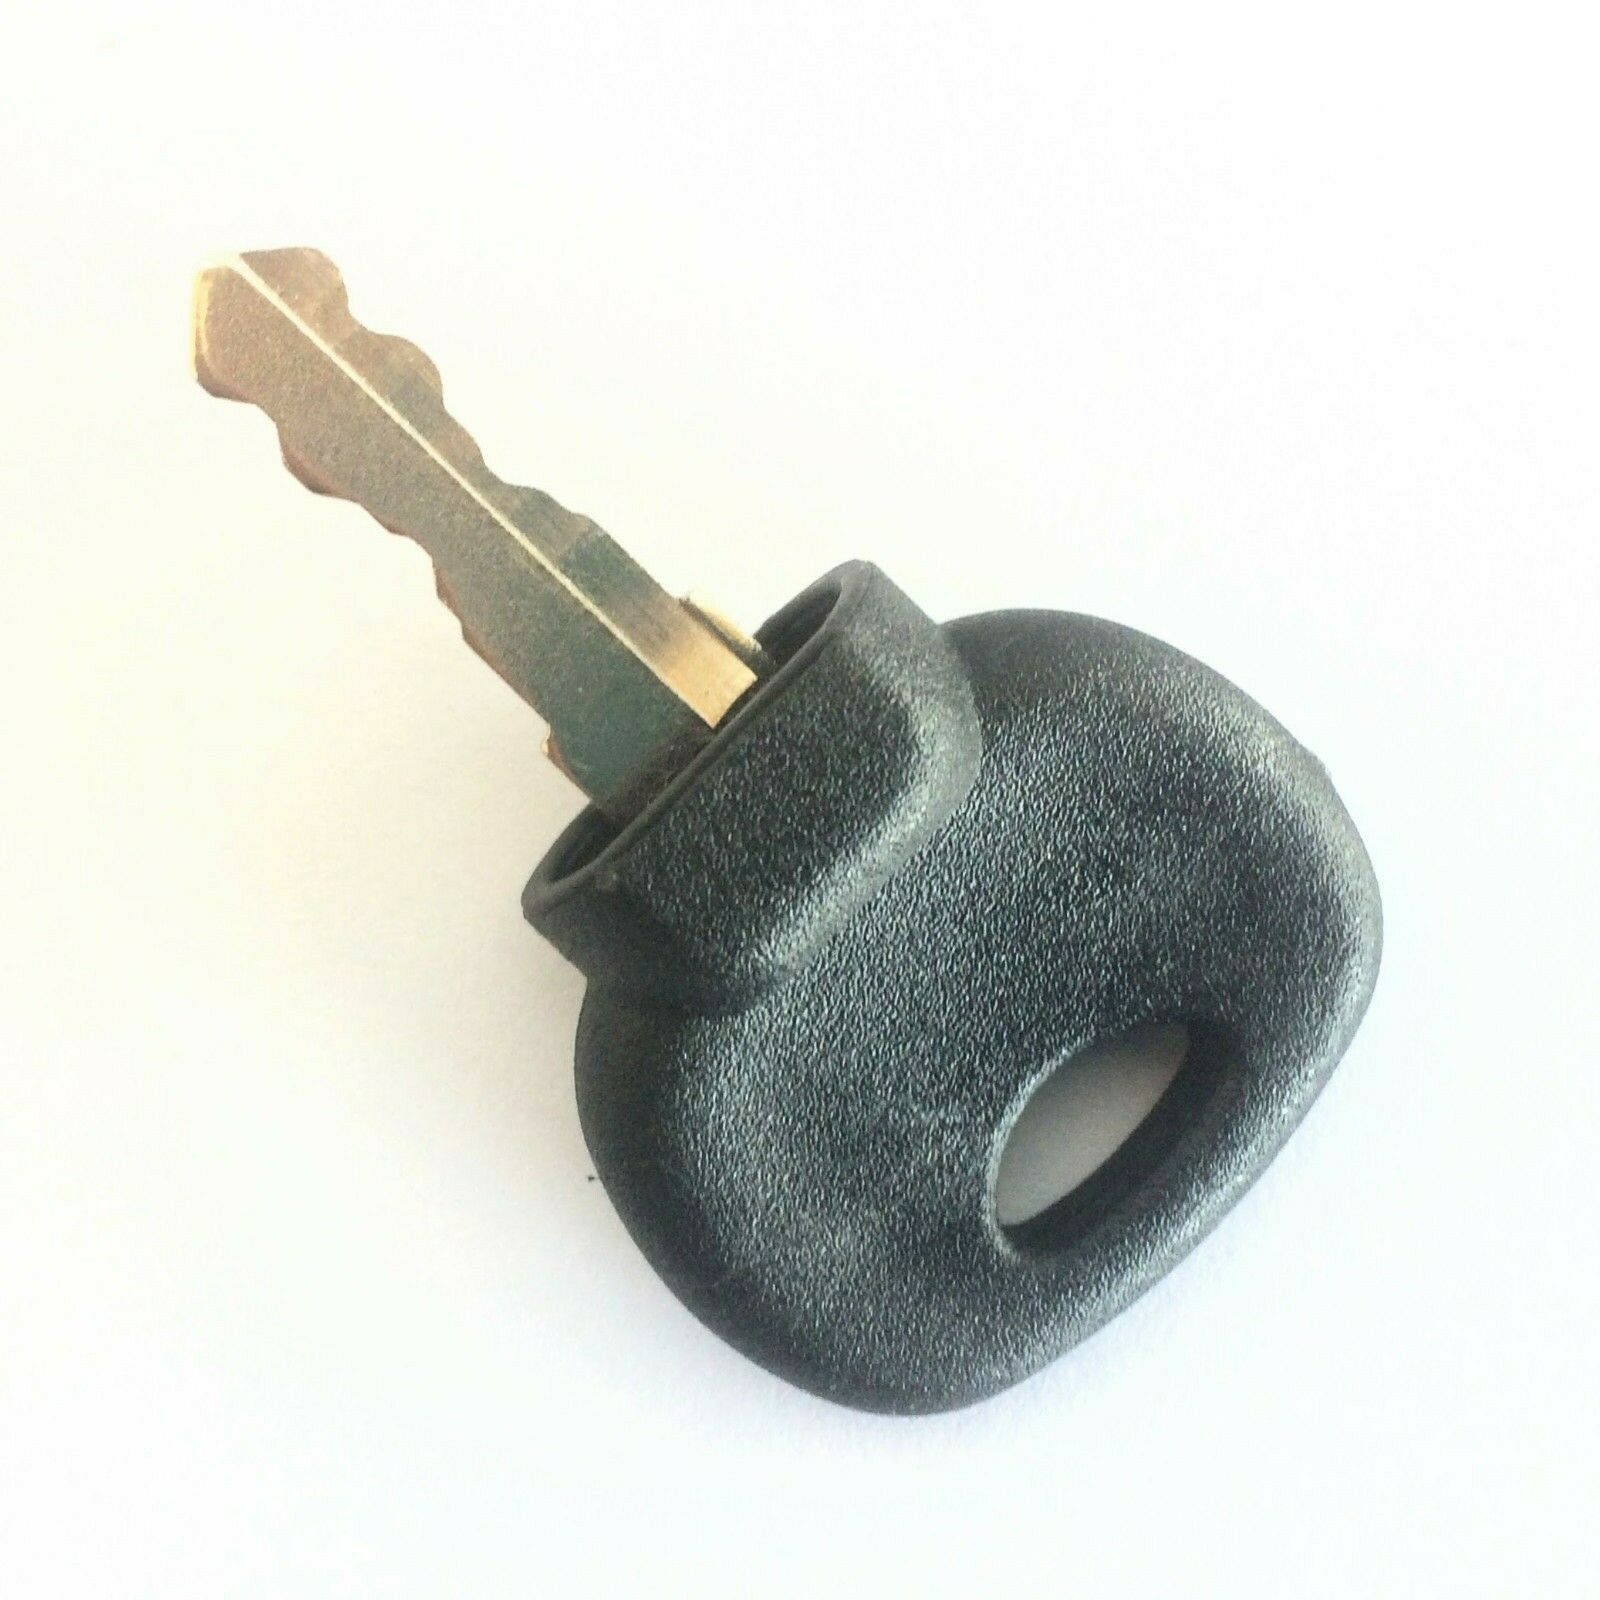 Ignition Key Accessories Black Heavy Equipment High Quality Replacement